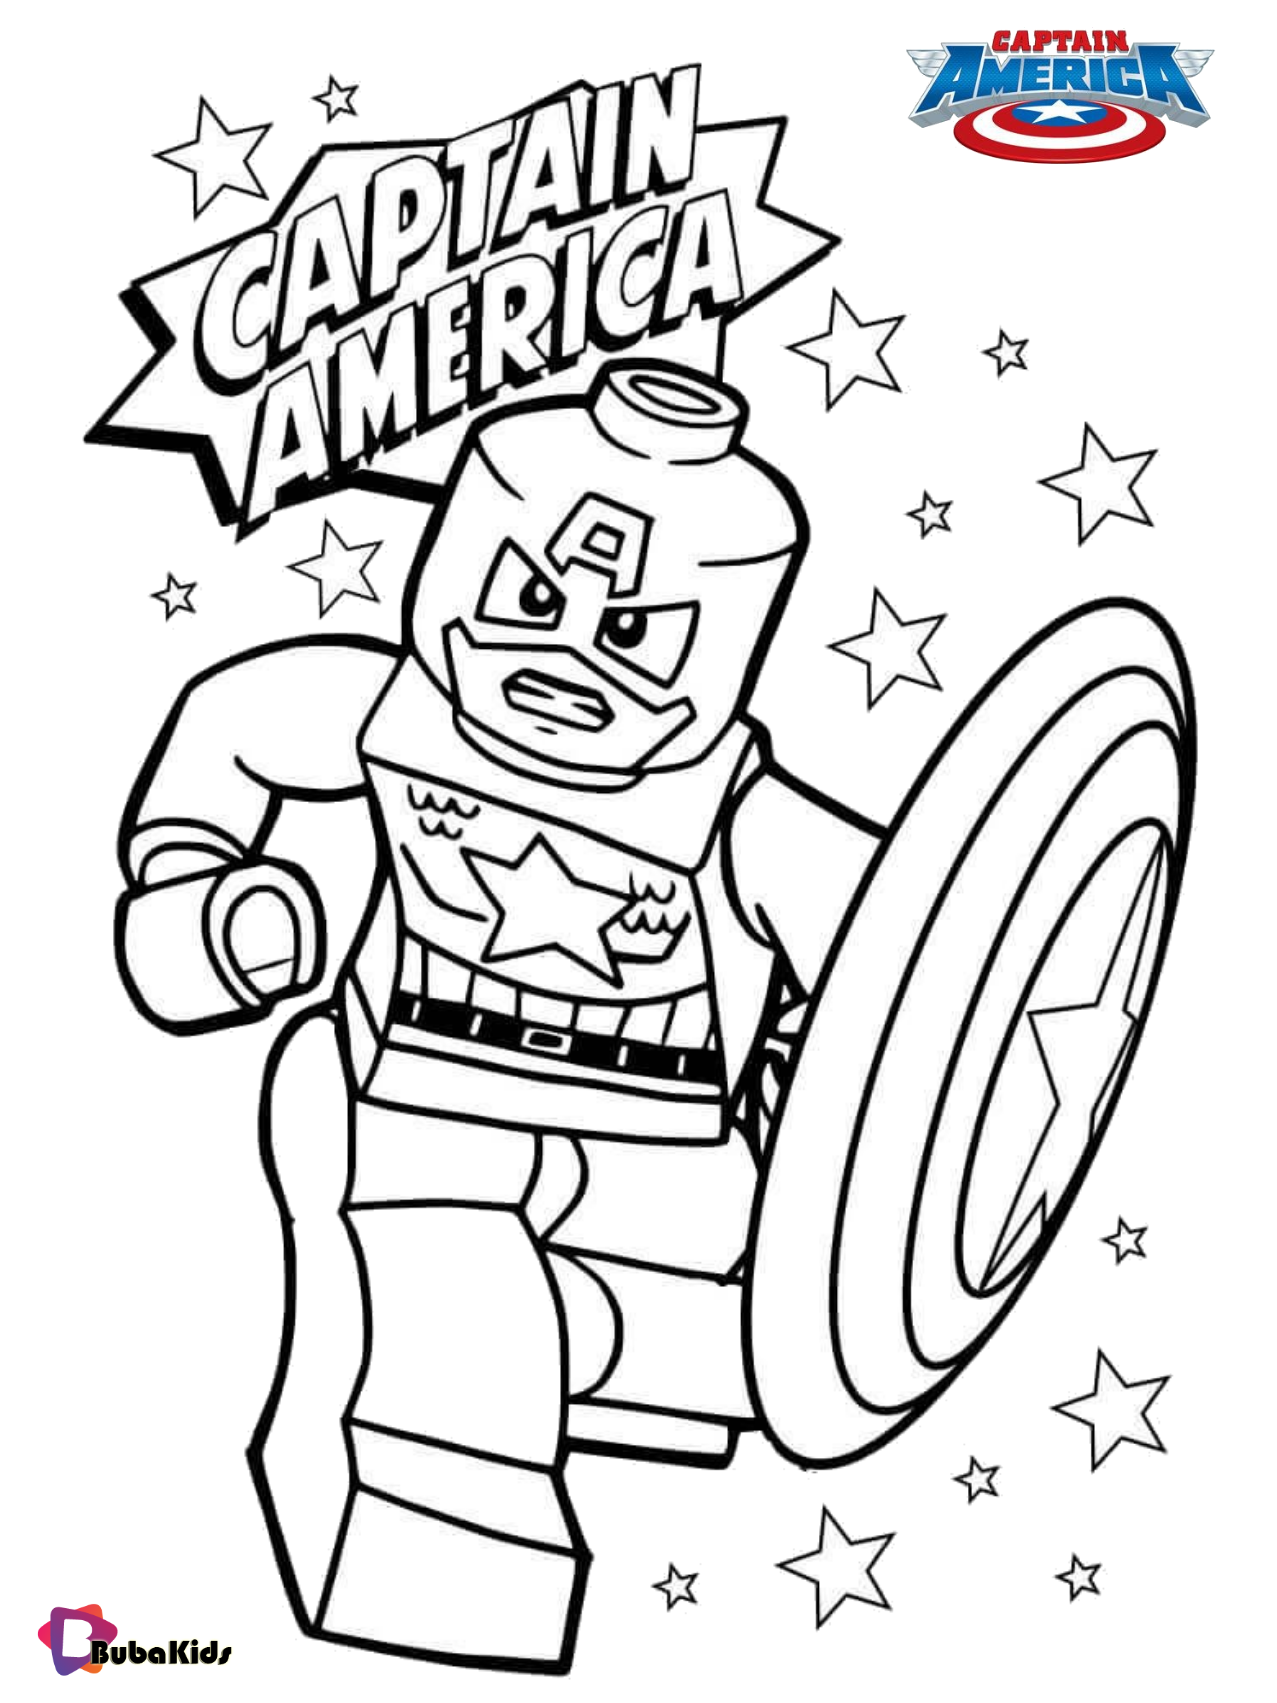 Captain America character lego superhero edition coloring pages Wallpaper